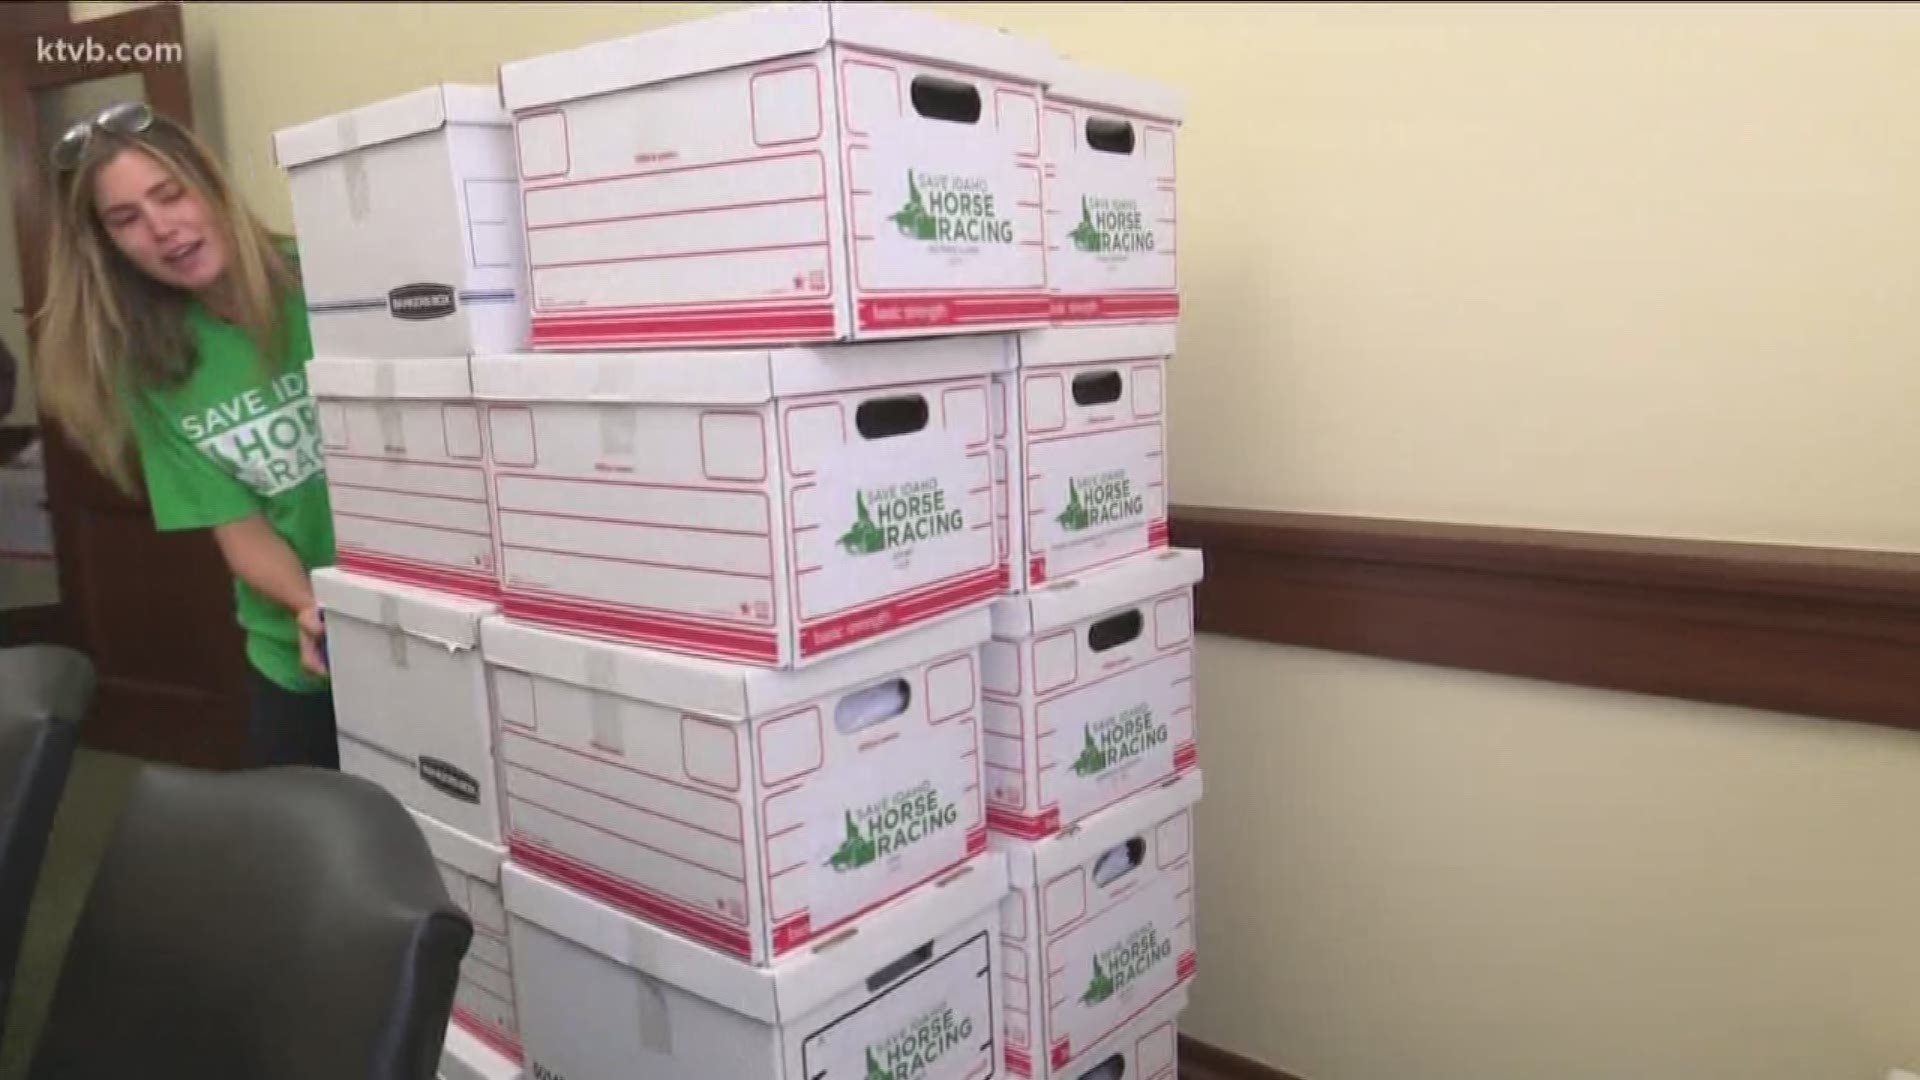 Thousands of signatures were delivered to the Idaho secretary of state's office.